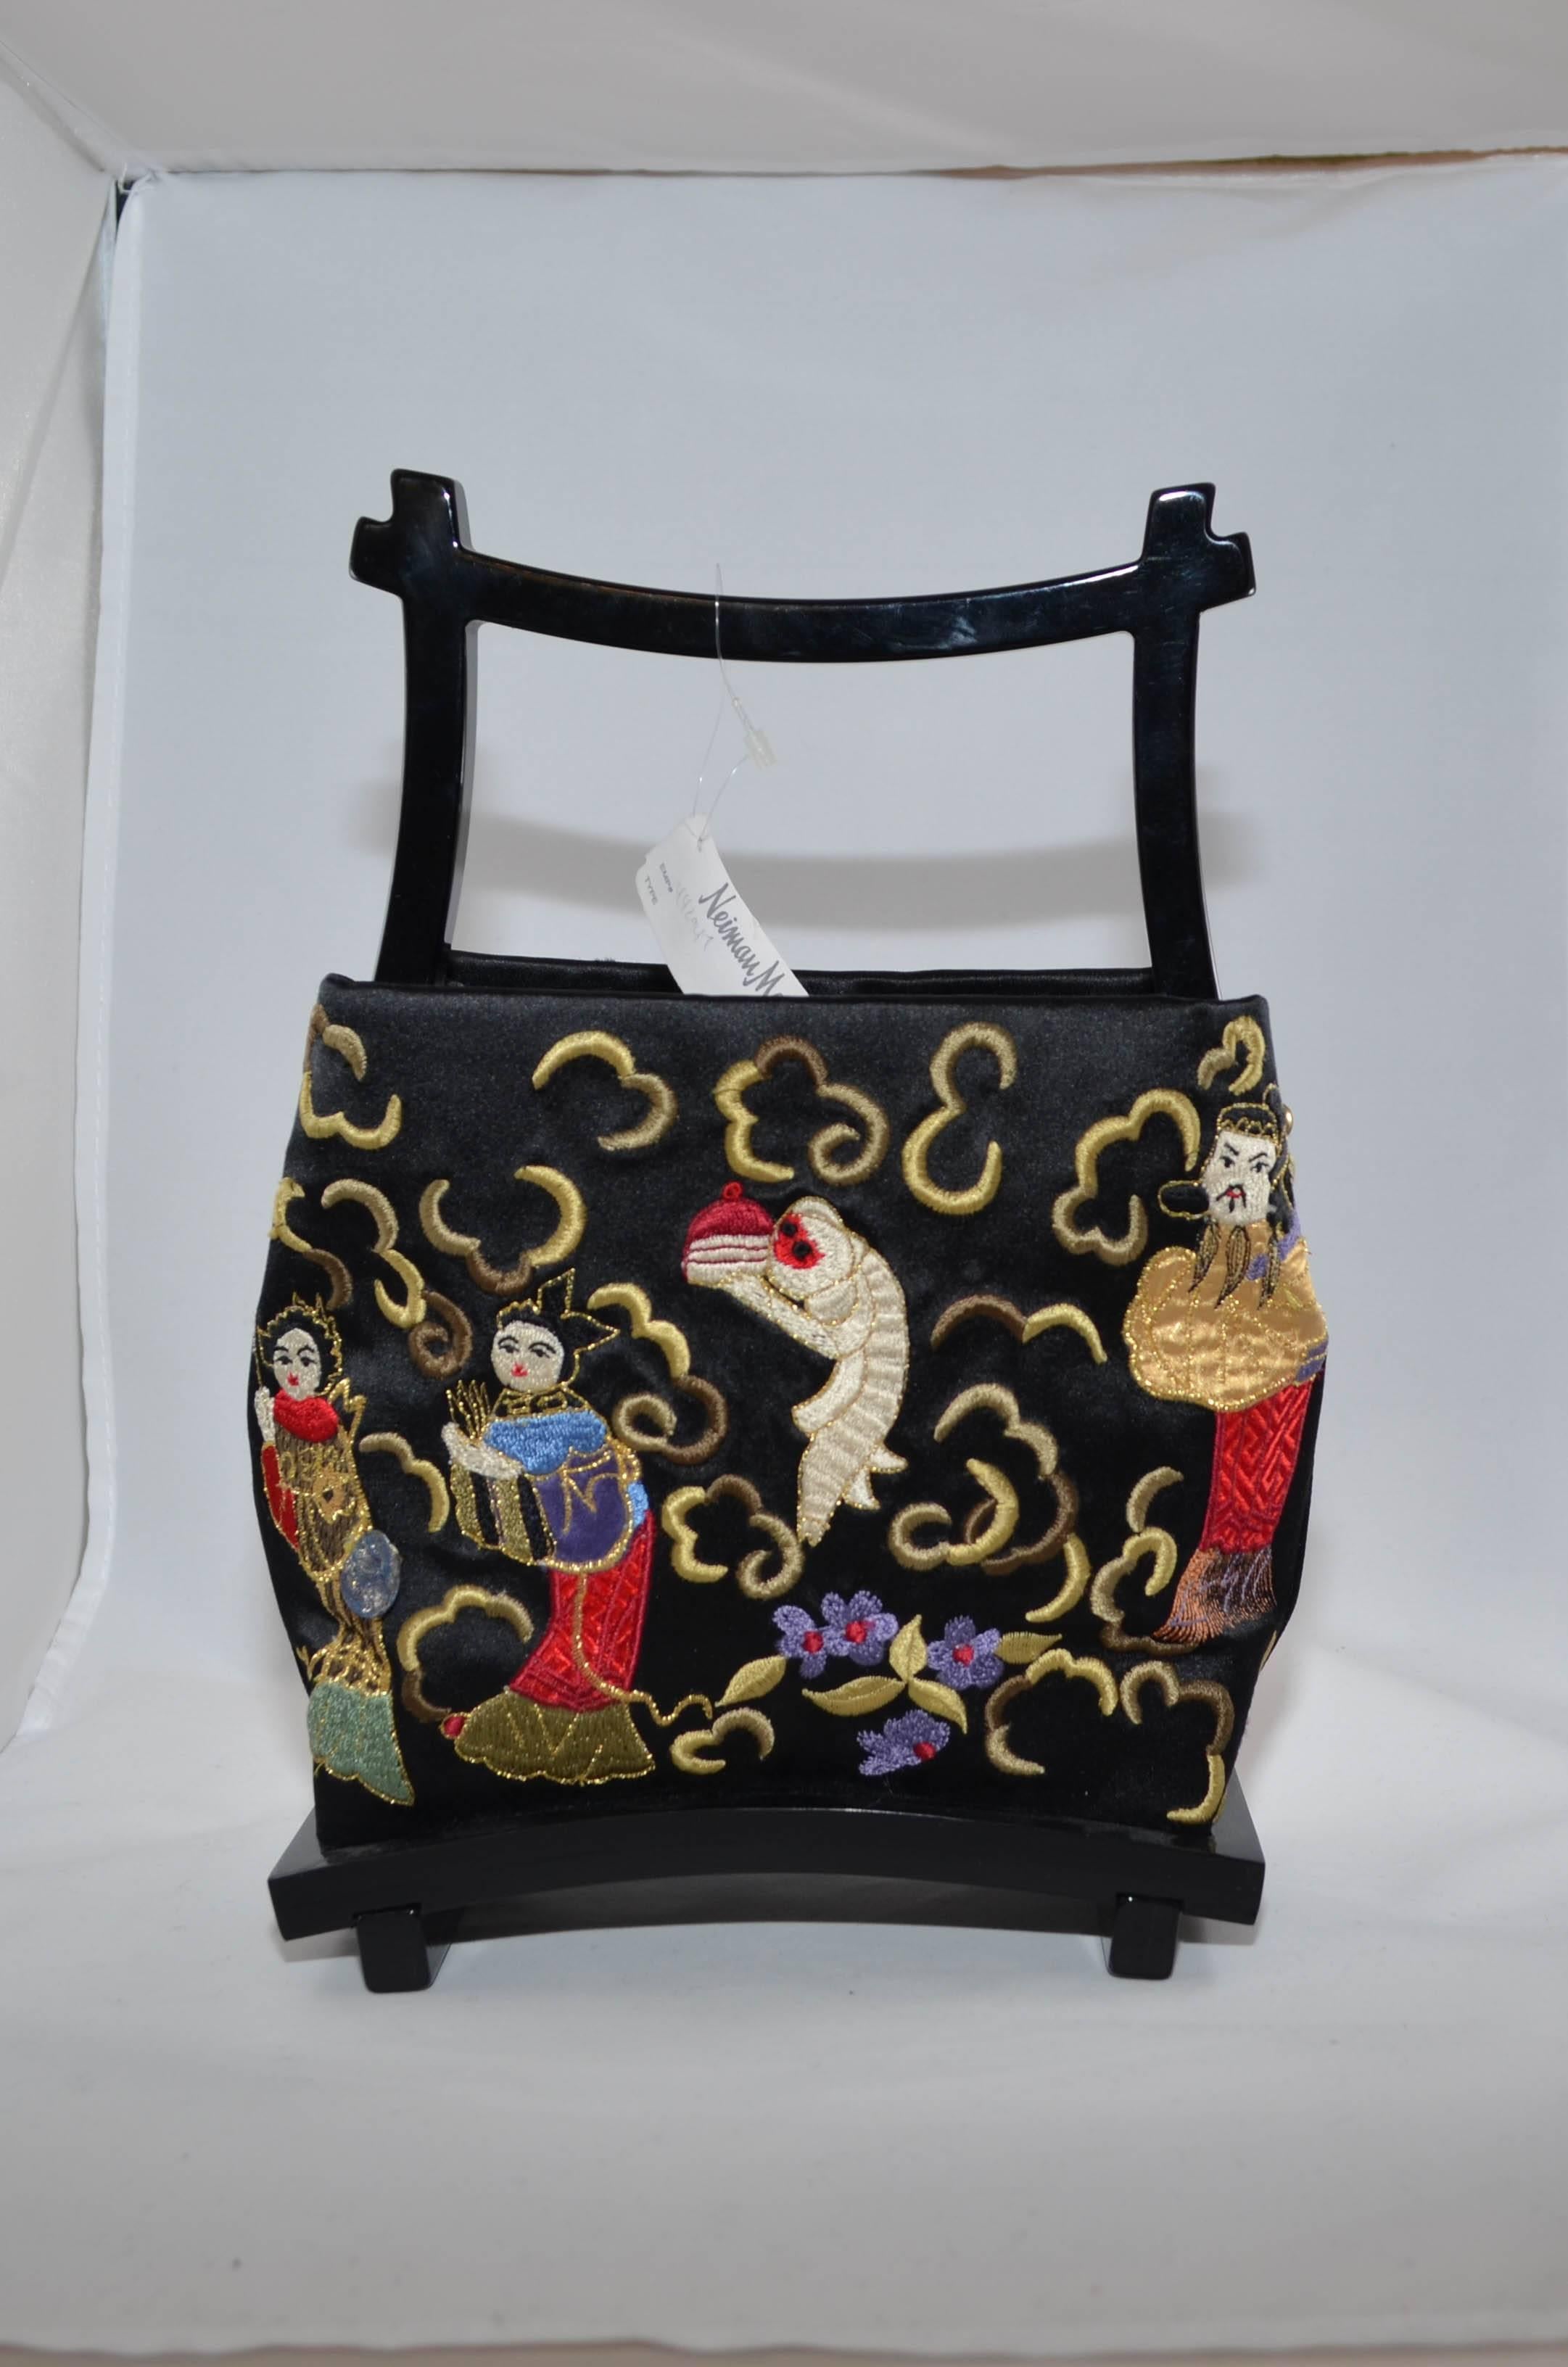 Natori Silk Embroidered Evening Bag. Black silk background with multicolored embroidery depicting a Chinese scene. Black lacquered wood frame. Excellent condition.
Measurements in inches: 
Height 6.5
Width 8
Depth 3
Handle Drop 2.5